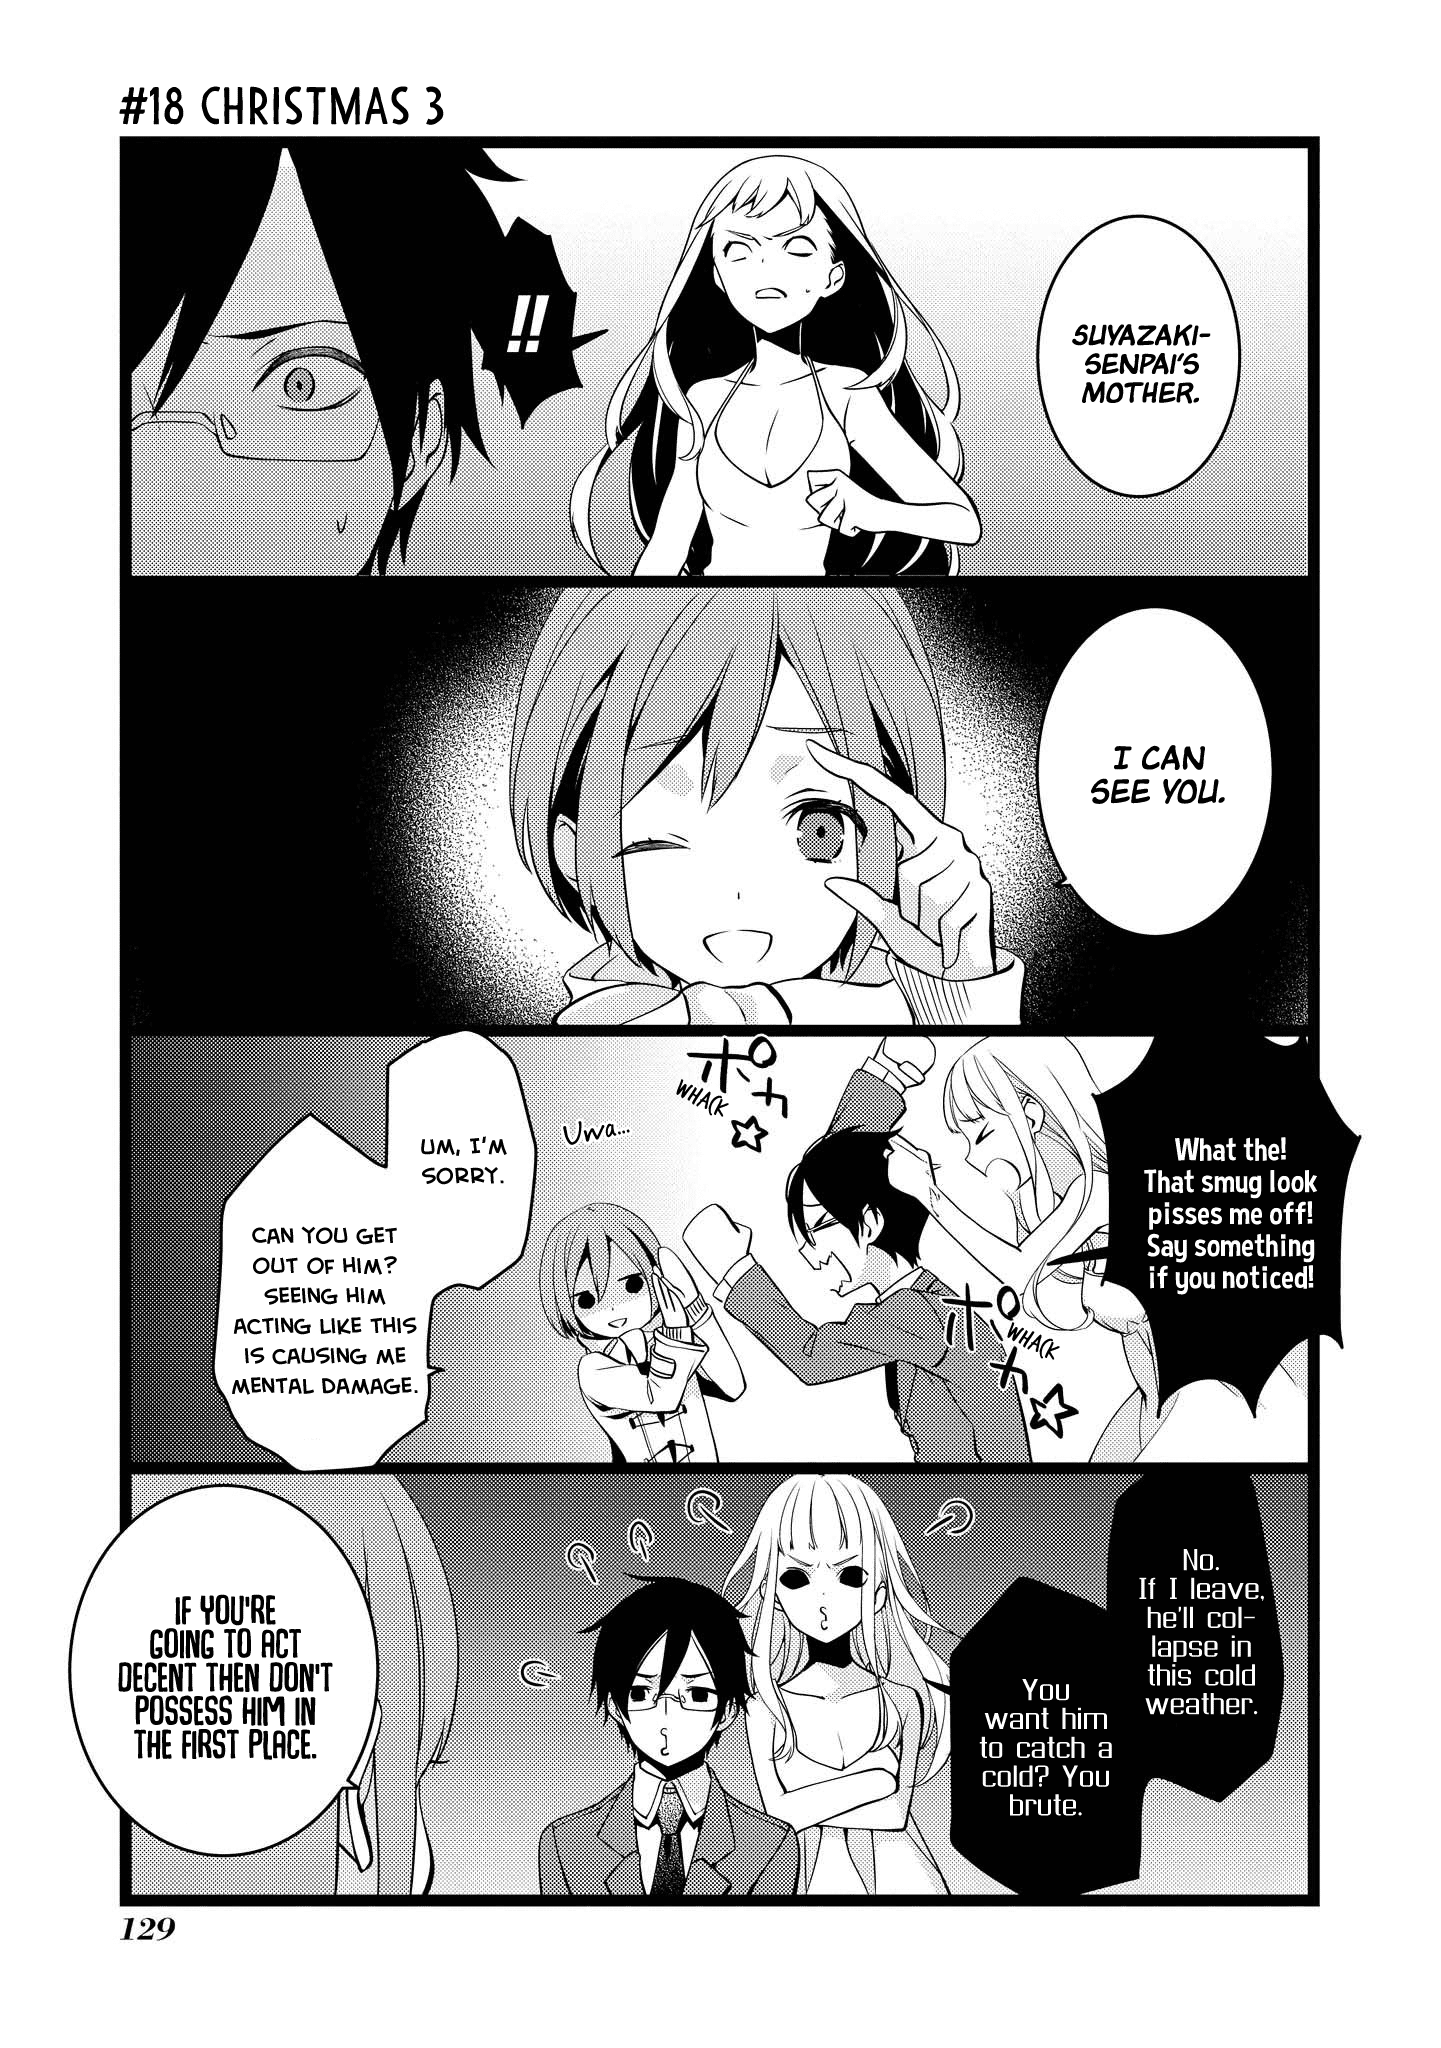 A Pervert In Love Is A Demon. - Page 1